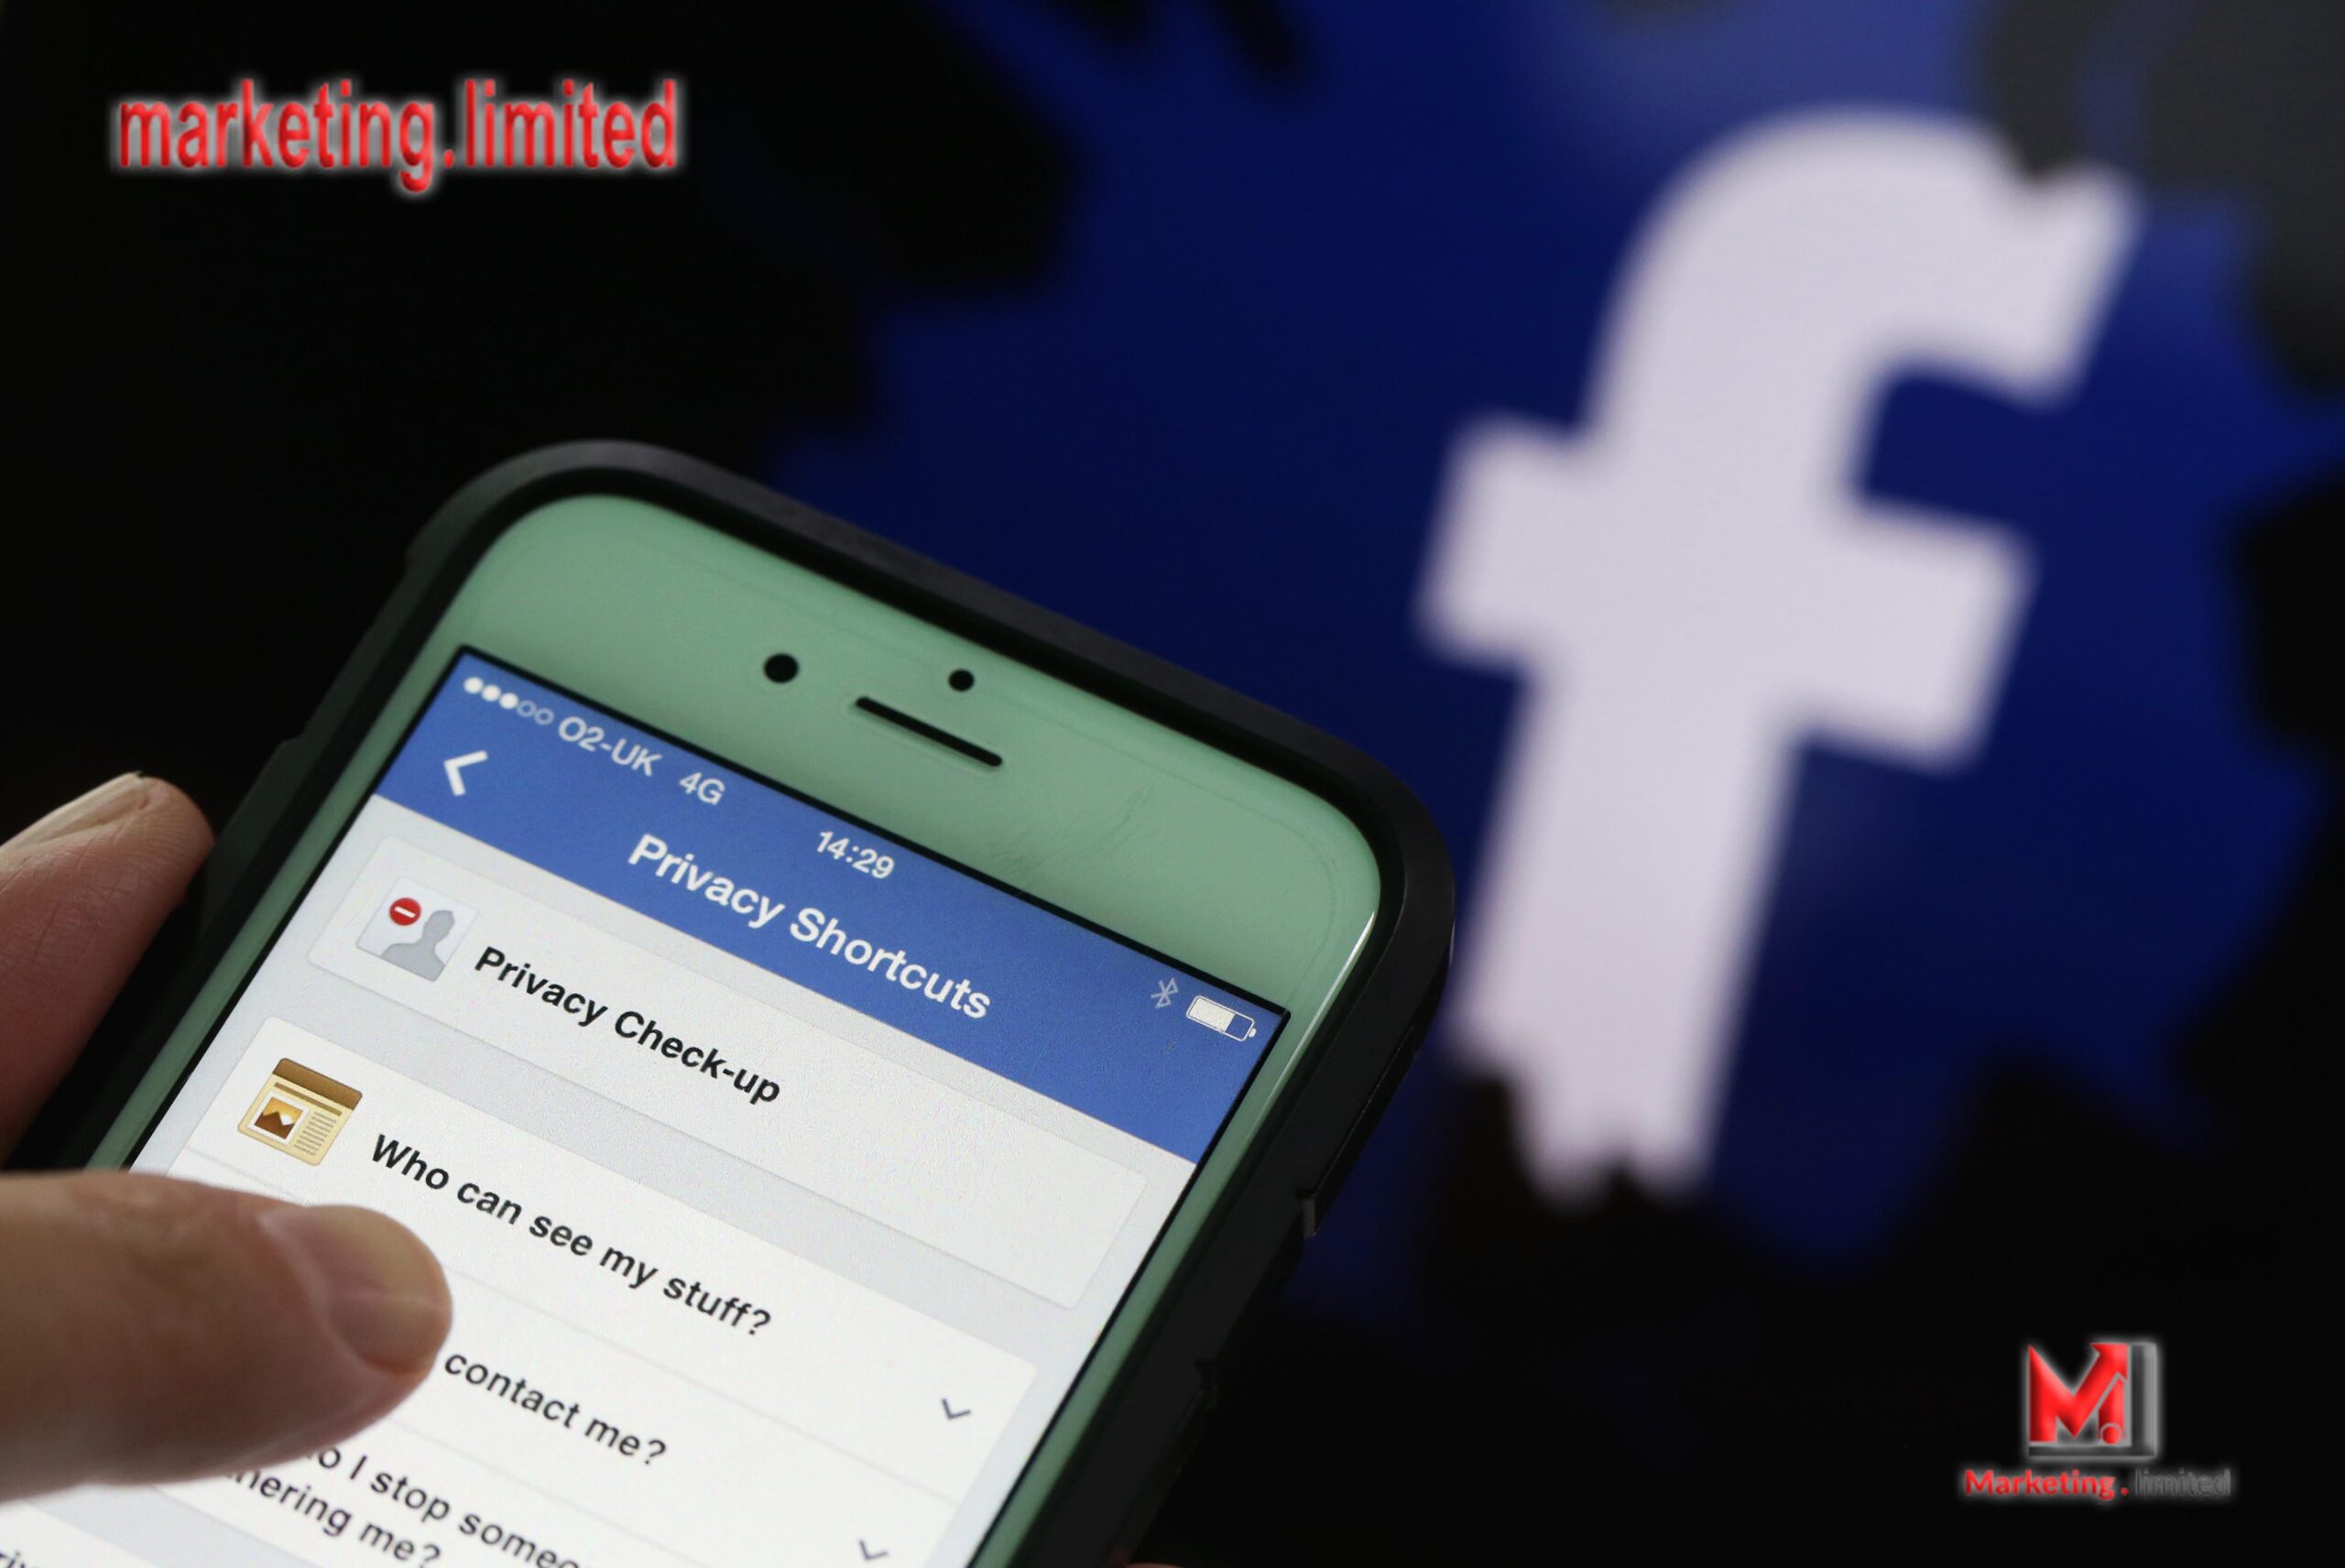 Privacy setting shortcuts are displayed on Apple Inc. iPhone 6 smartphone screen as a FaceBook Inc. logo is seen in this arranged photograph taken in London, U.K., on Friday, May, 15, 2015. Facebook reached a deal with New York Times Co. and eight other media outlets to post stories directly to the social network's mobile news feeds, as publishers strive for new ways to expand their reach. Photographer: Chris Ratcliffe/Bloomberg via Getty Images